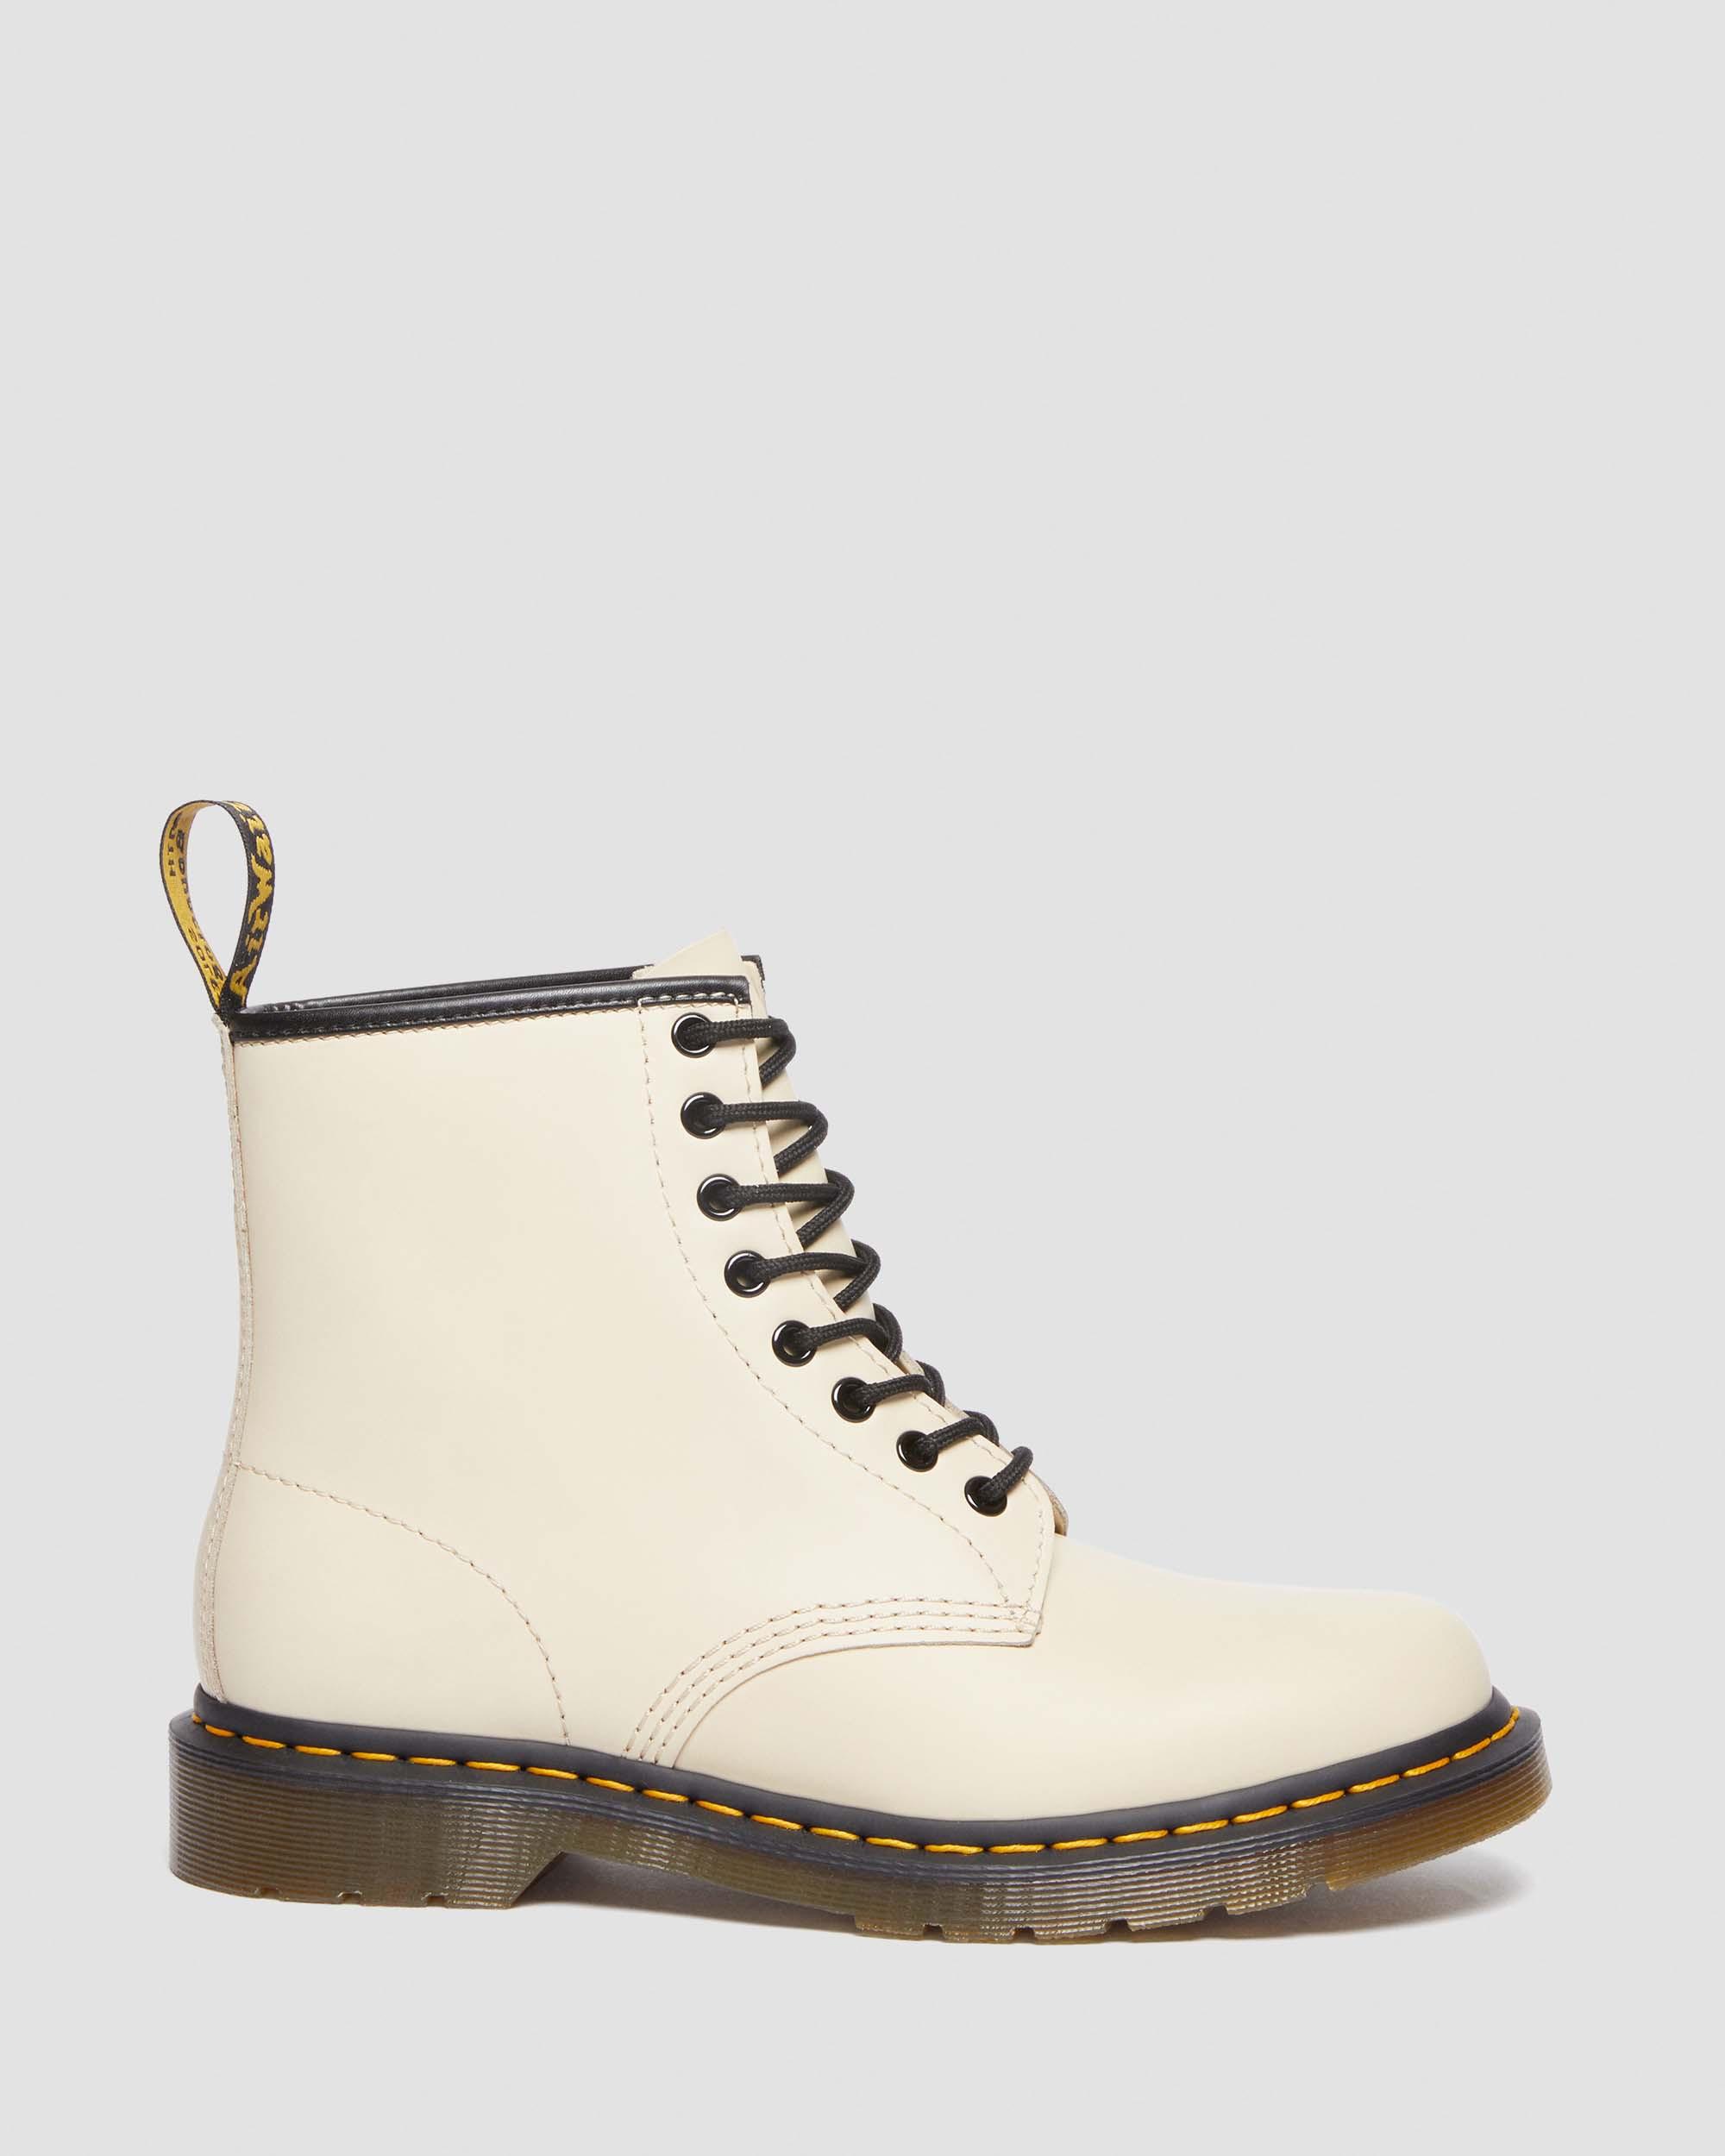 Up Boots Lace Martens Beige Leather | 1460 Parchment Dr. Smooth in